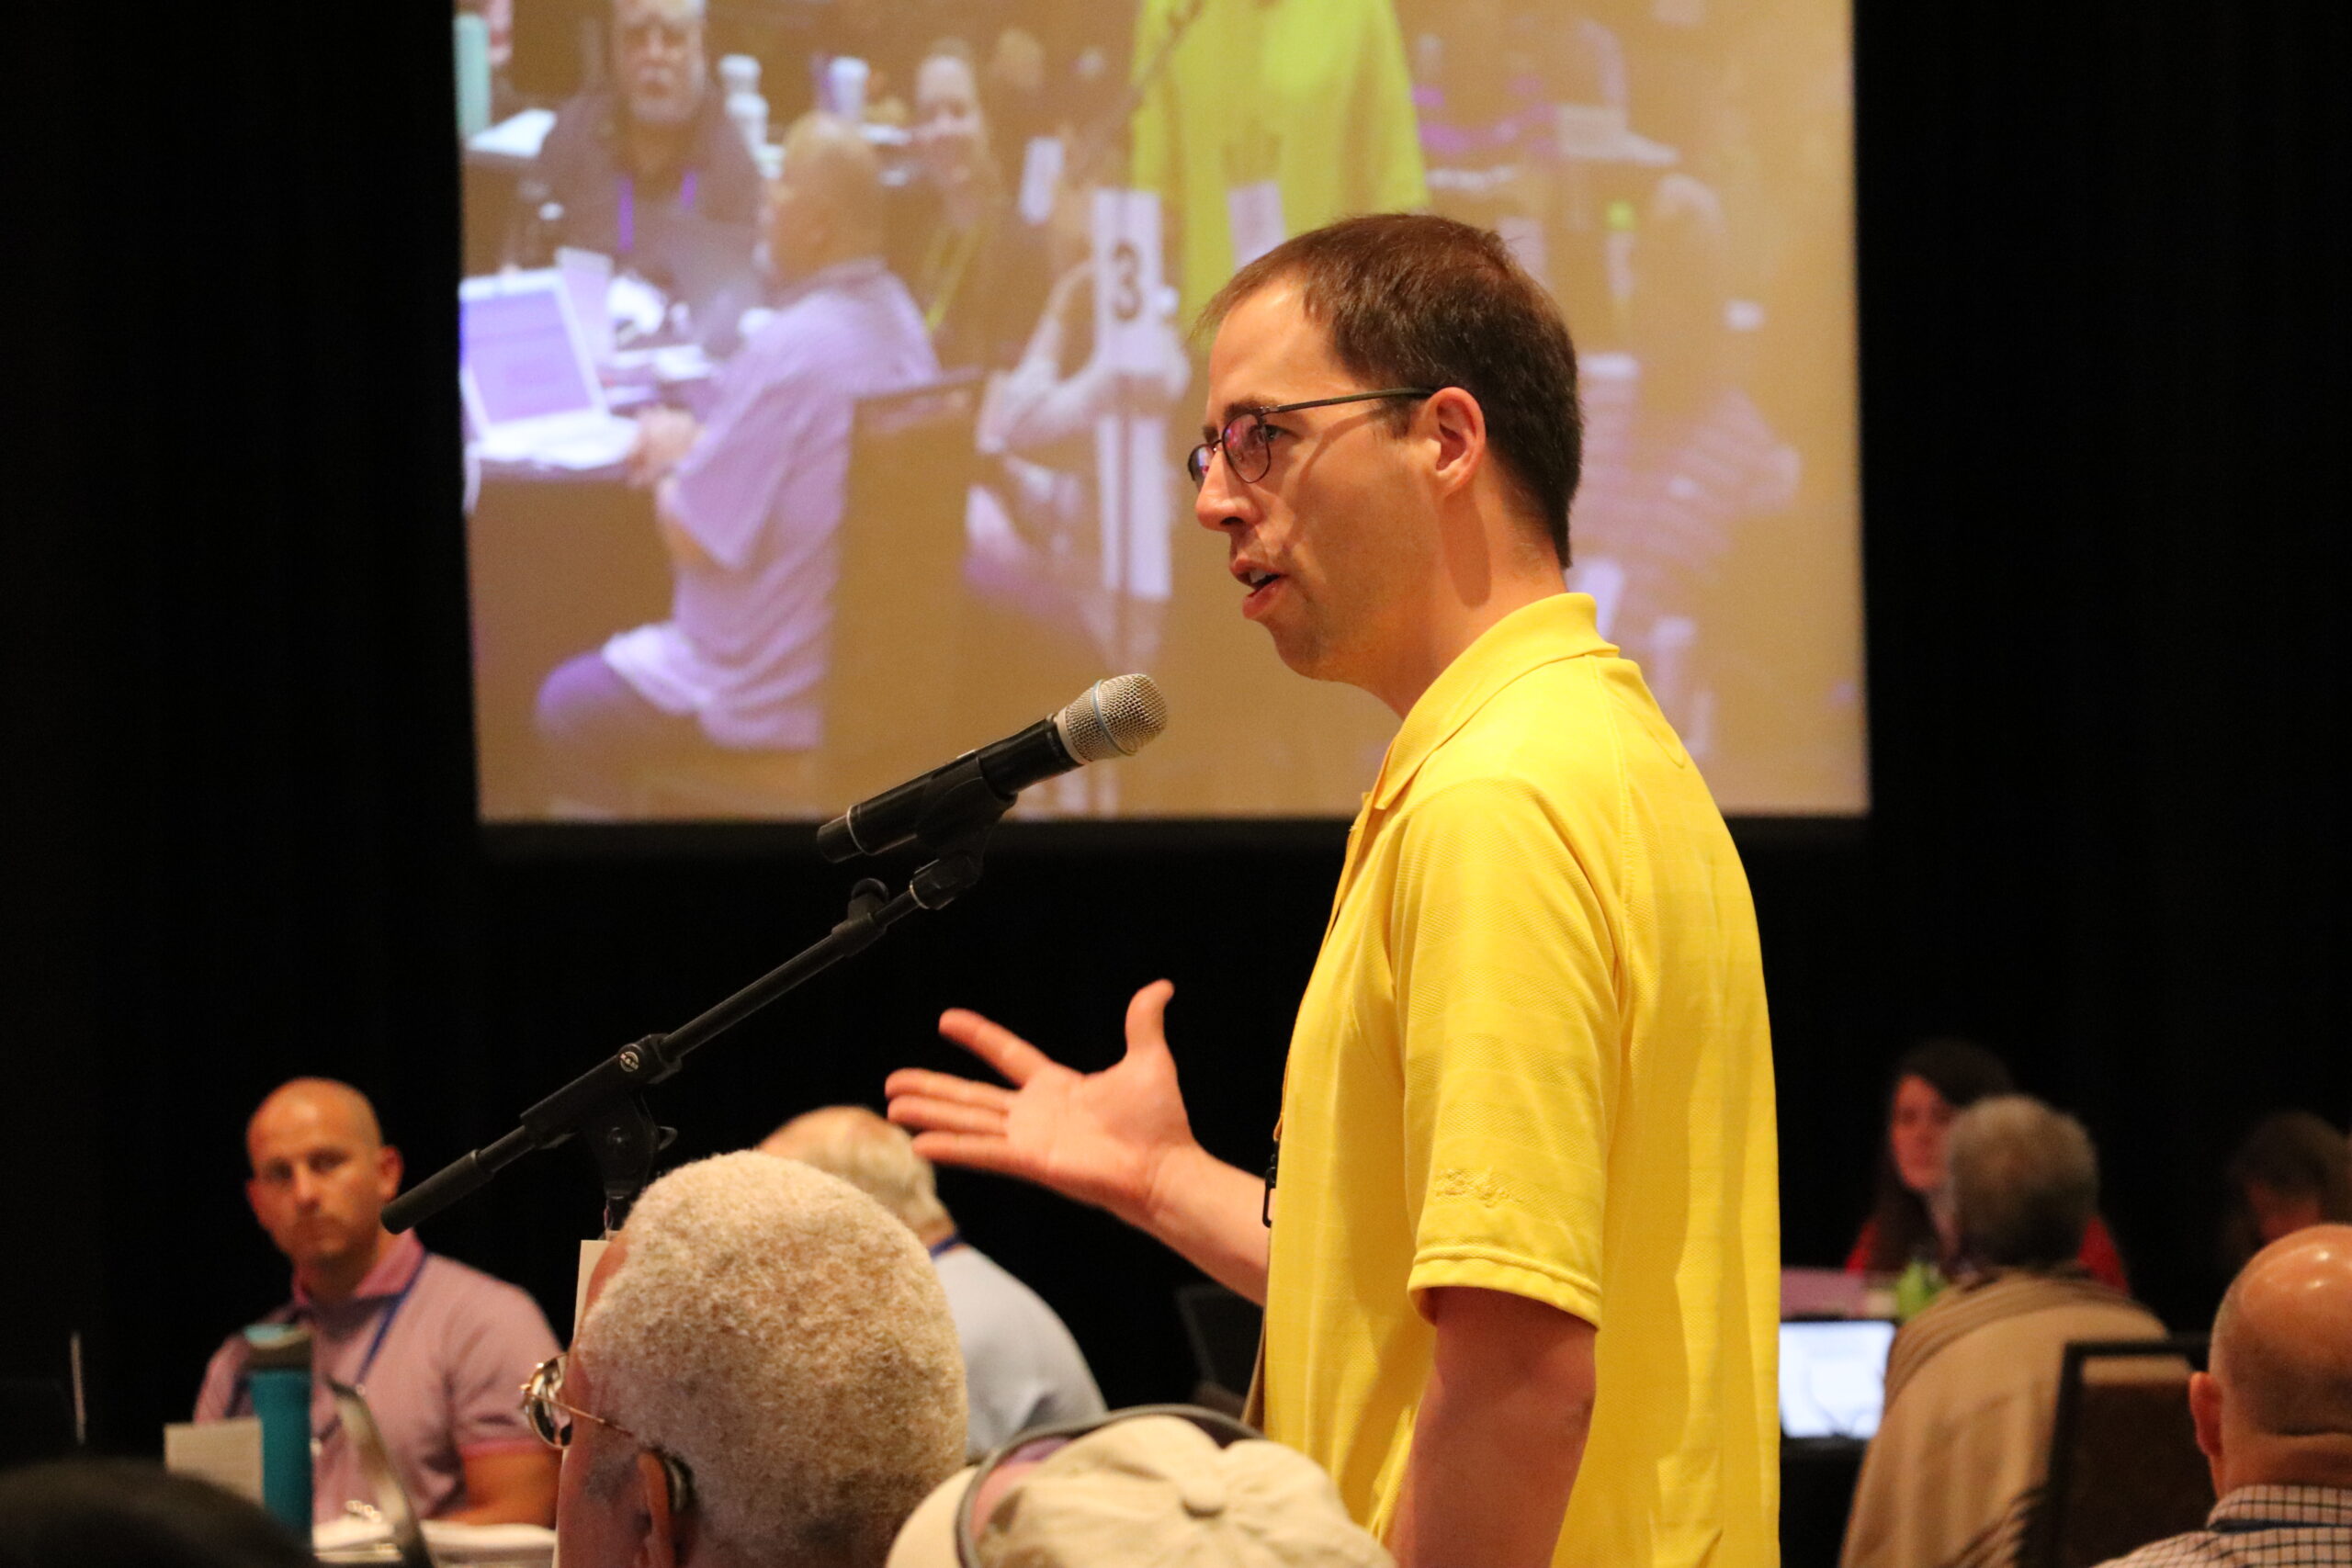 Committed to the future, General Synod embraces change